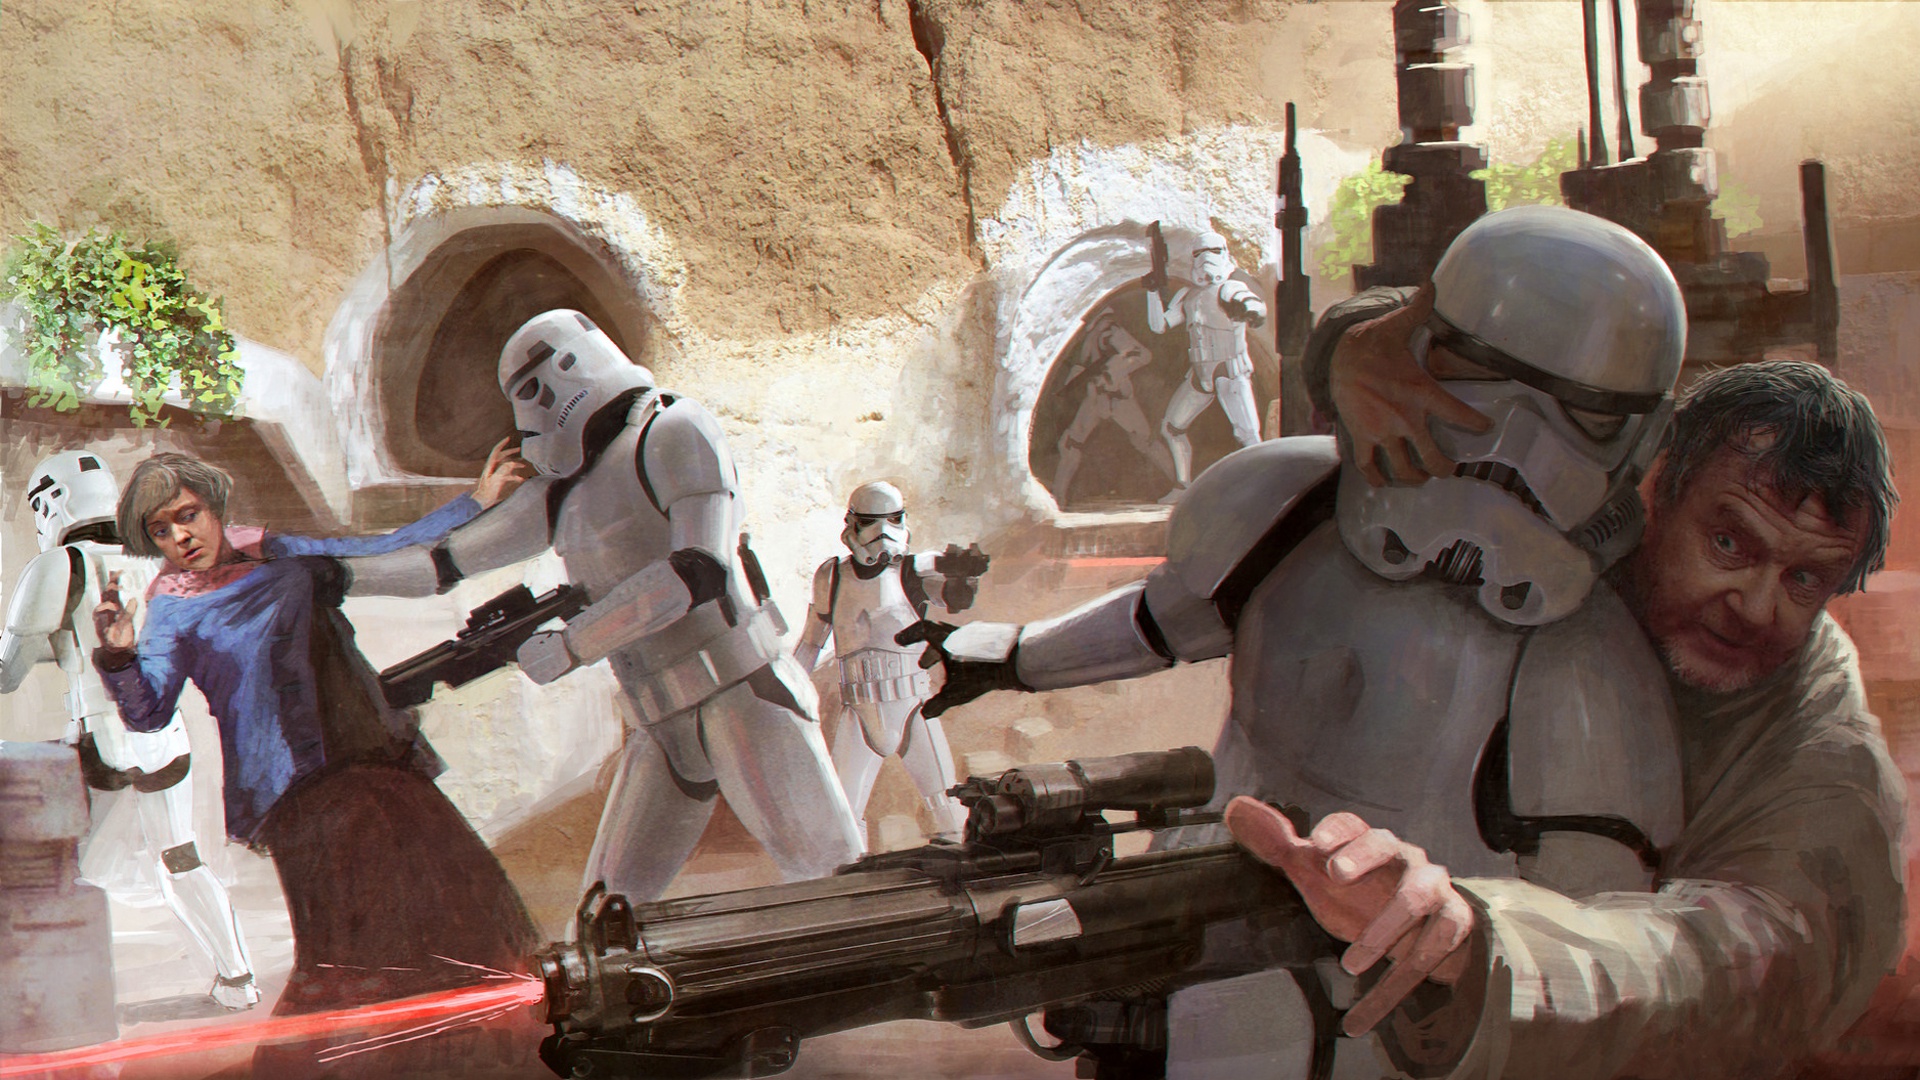 Tatooine Imperial Forces Stormtrooper Storm Troopers Star Wars 1920x1080